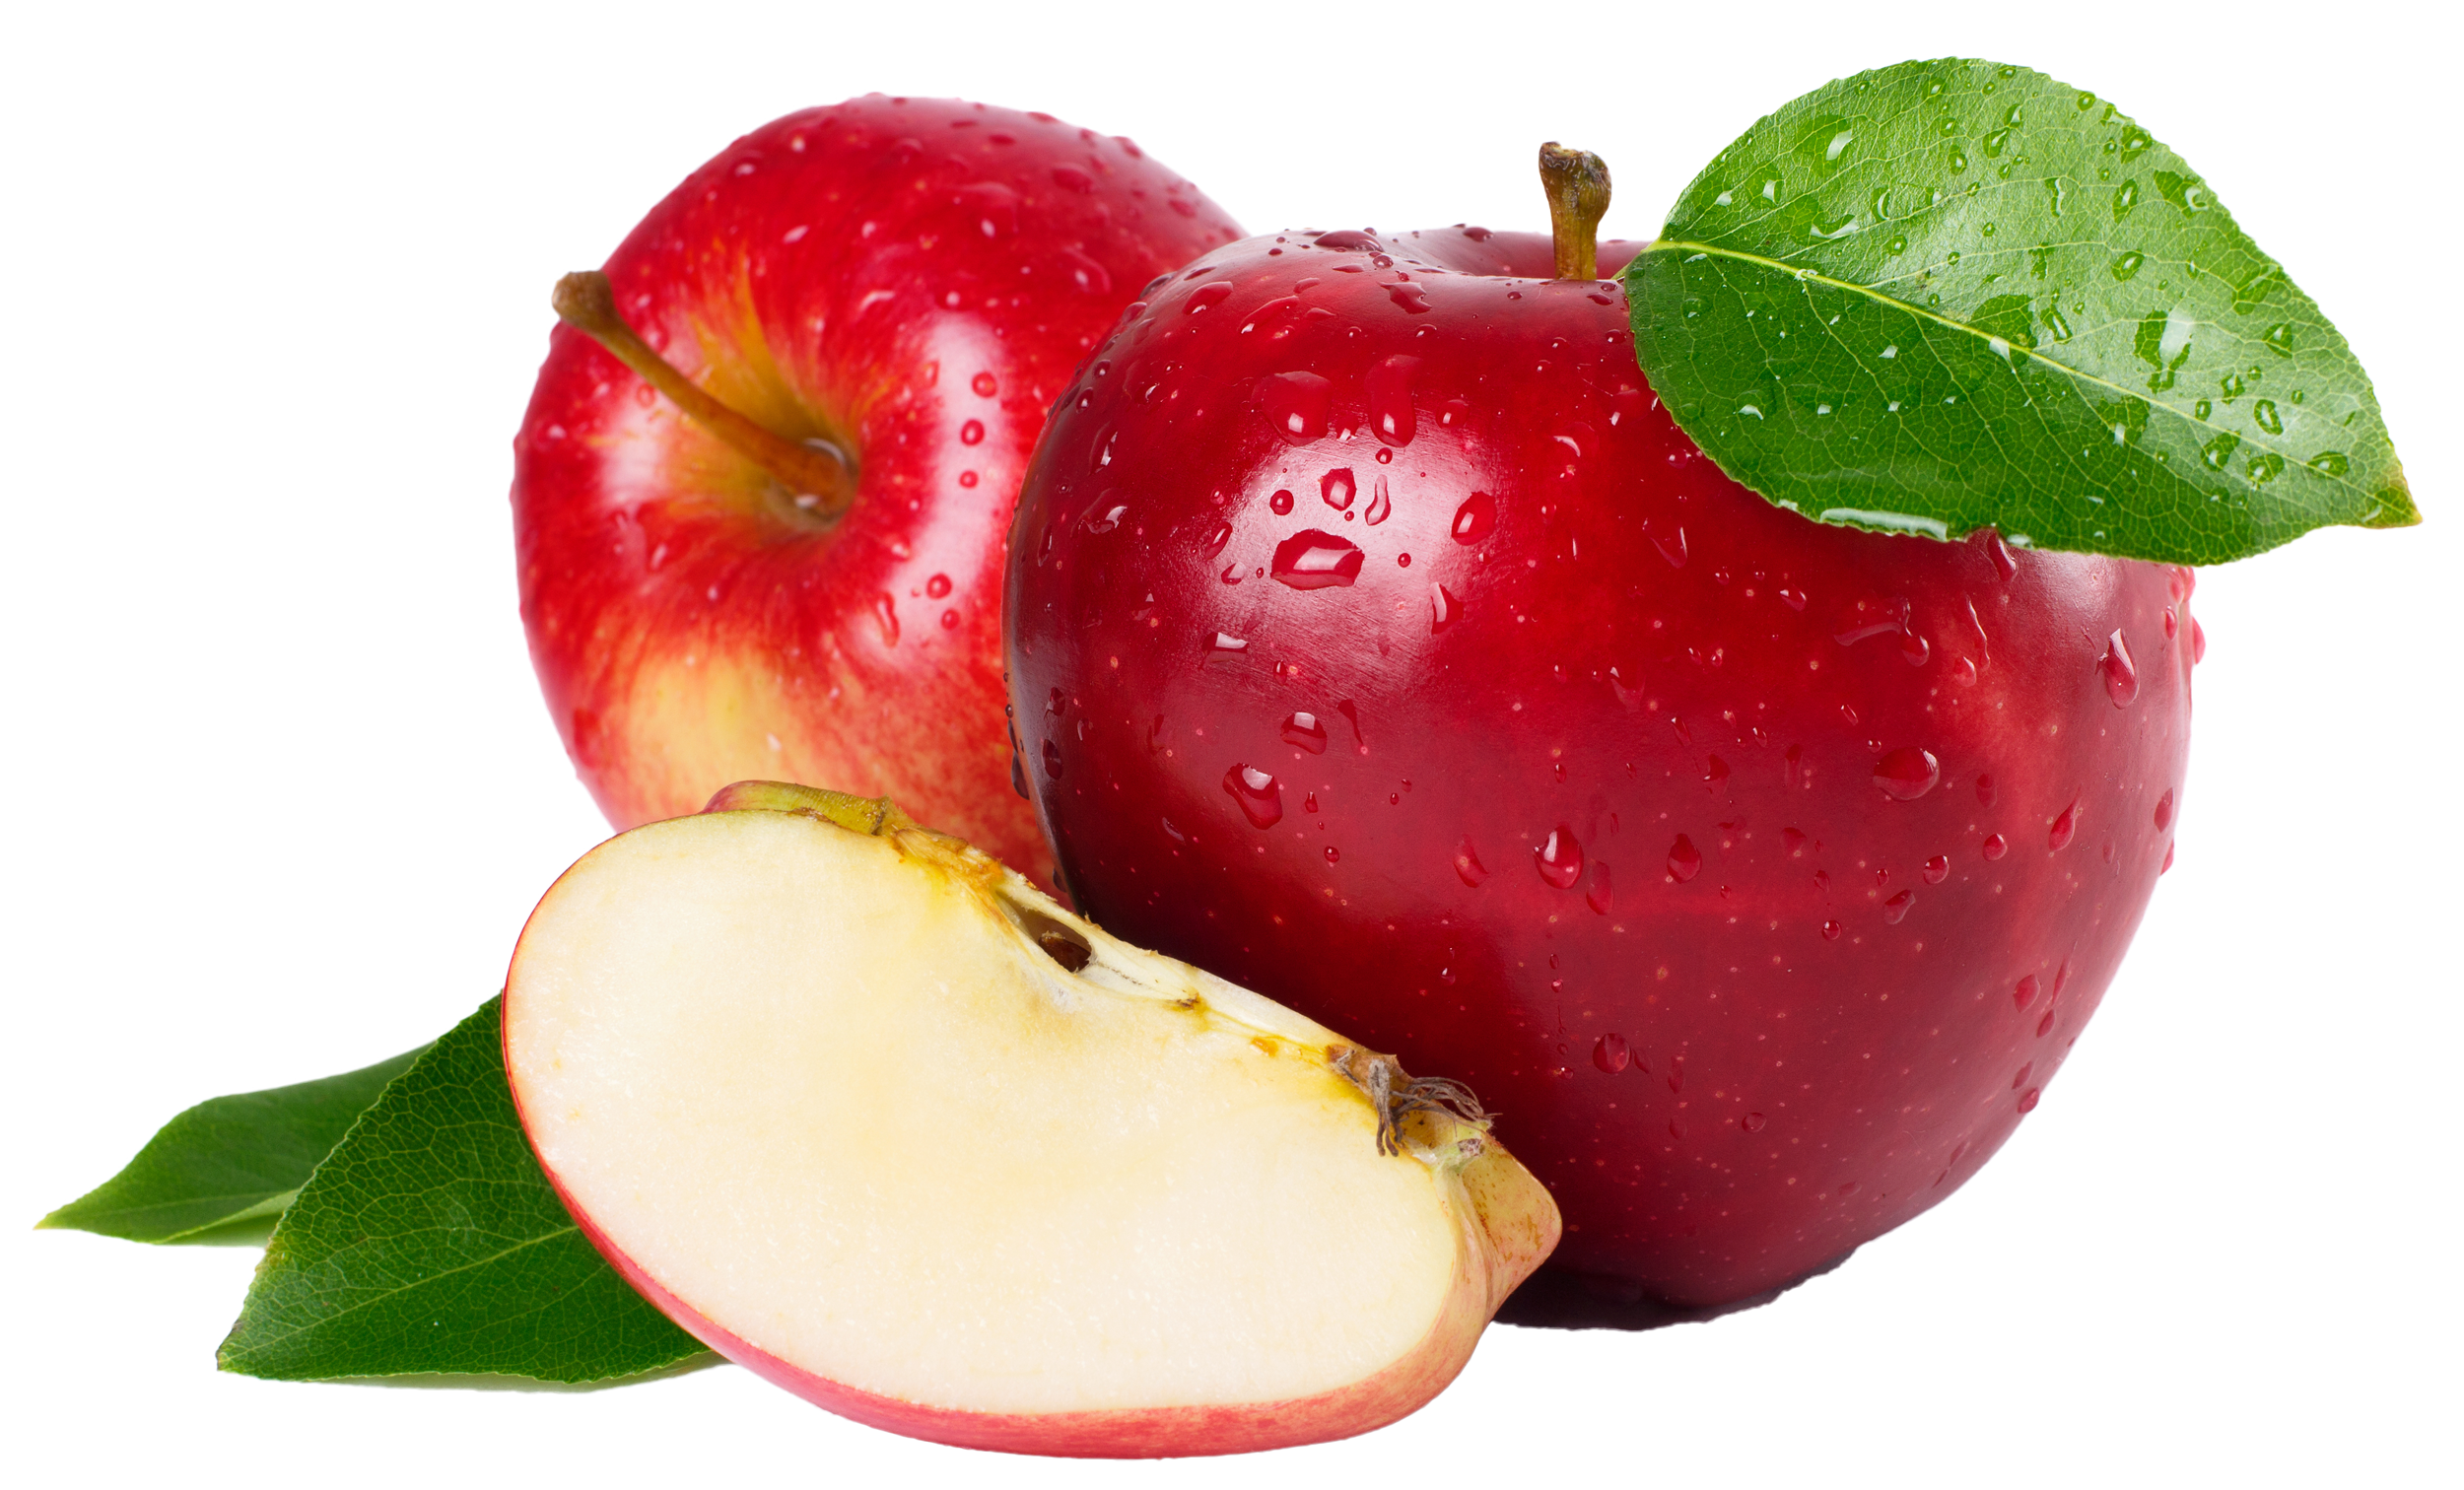 Fat clipart healthy thing. Large red apples png